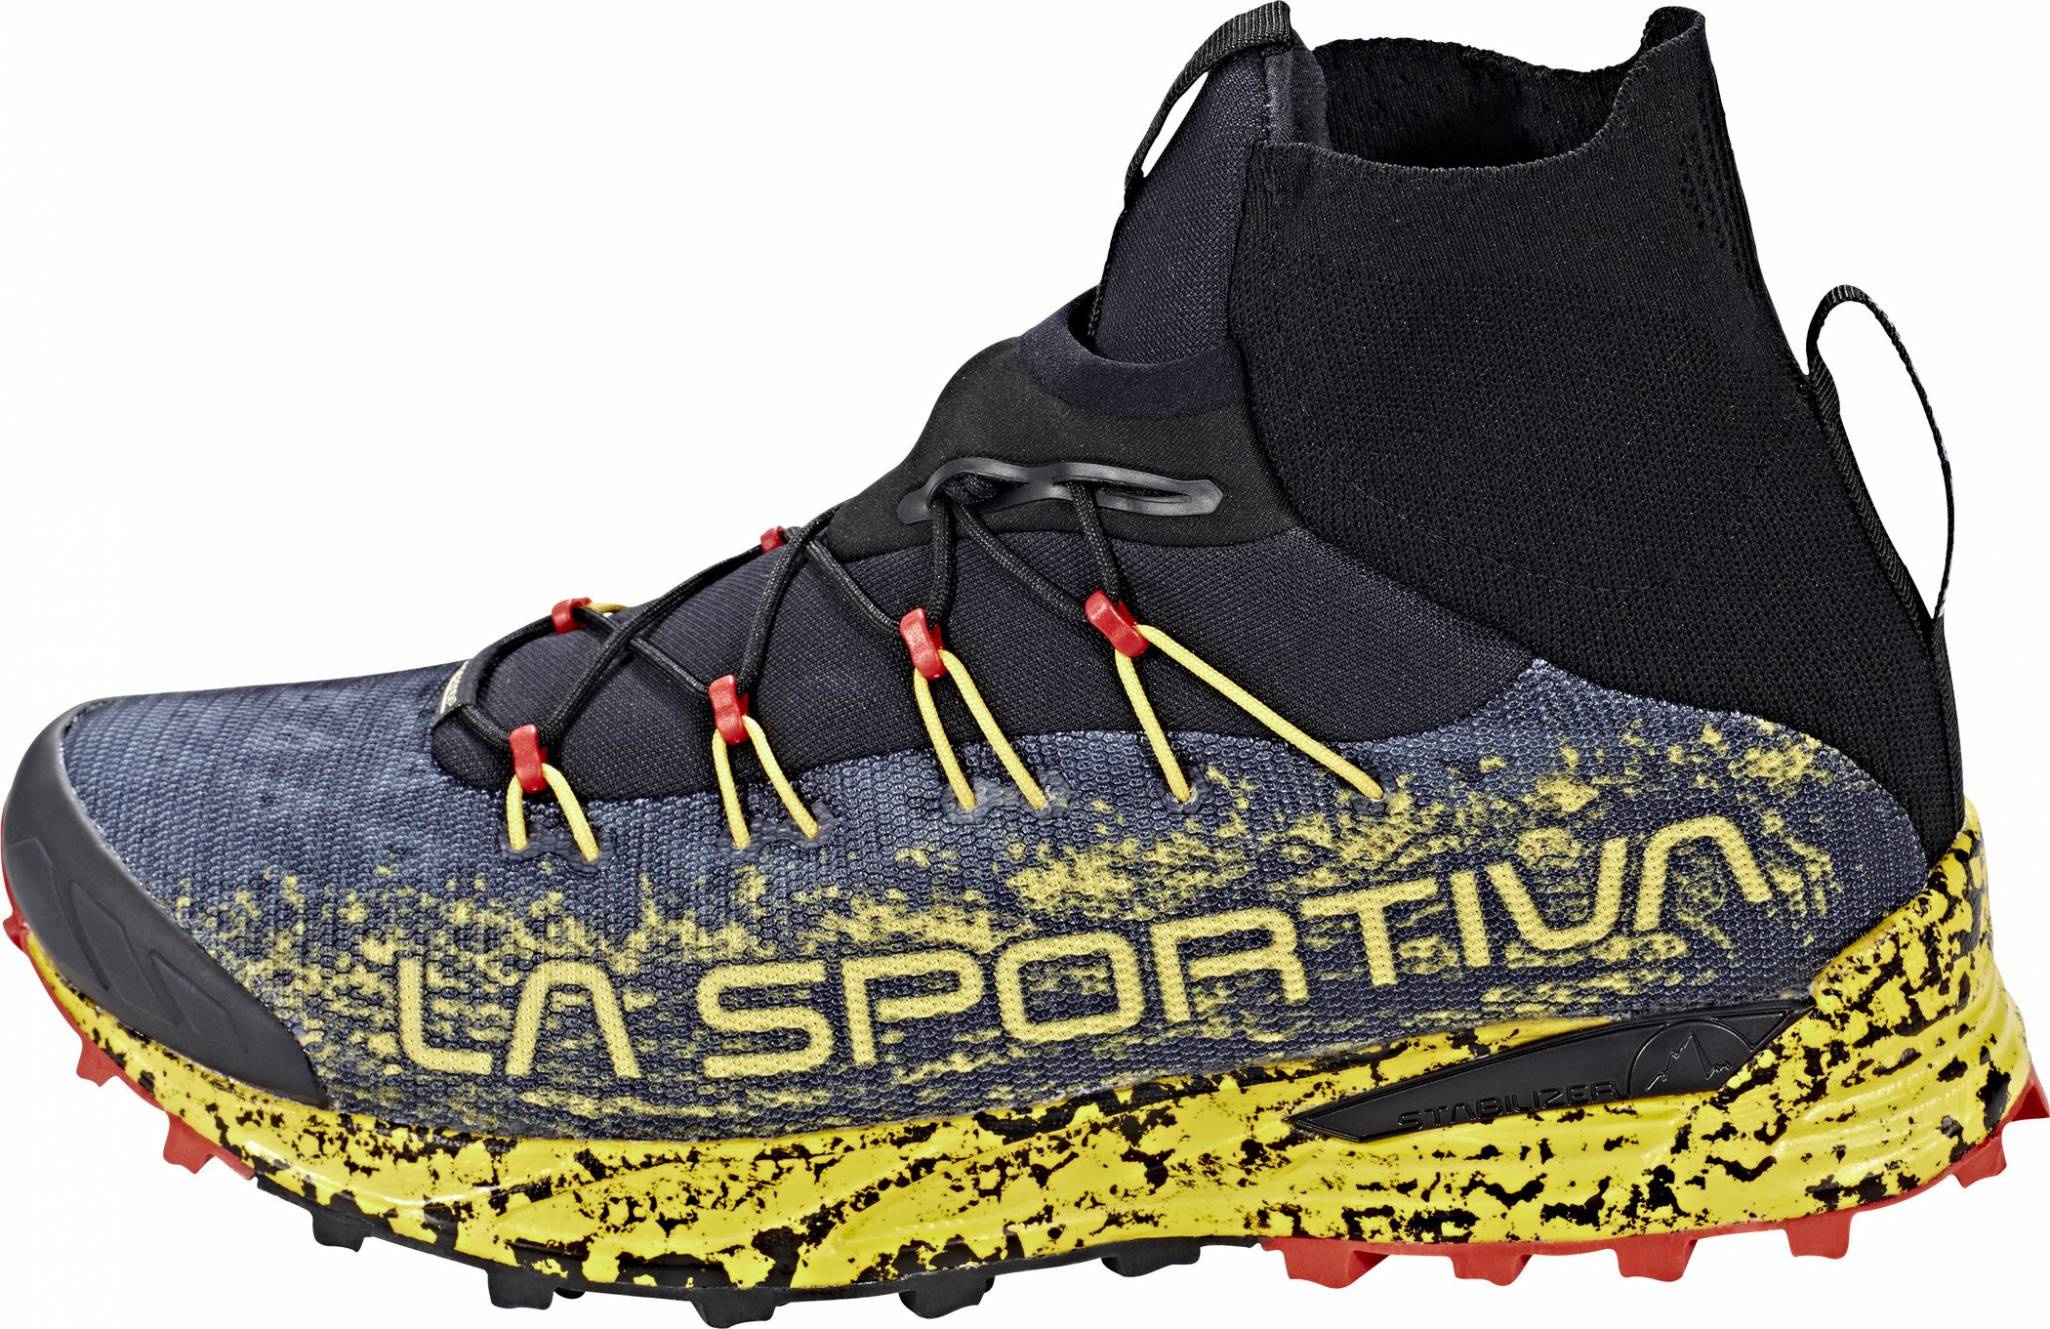 la sportiva running shoes review